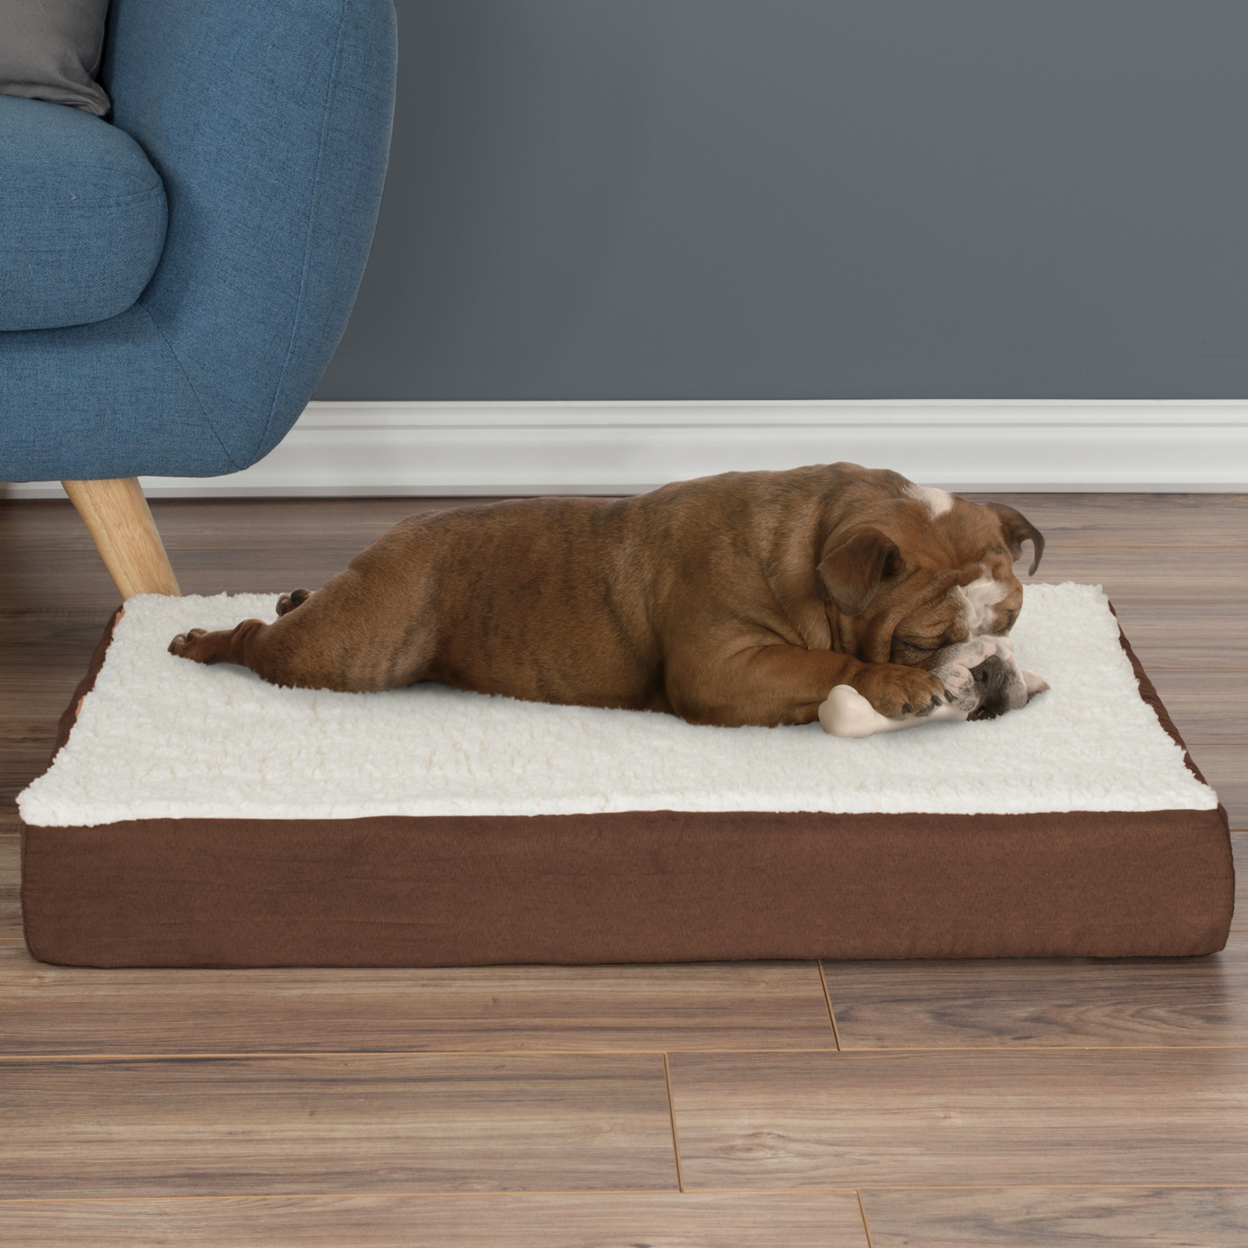 Orthopedic Sherpa Top Pet Bed With Memory Foam And Removable Cover 30 X 20 X 4 Brown Medium